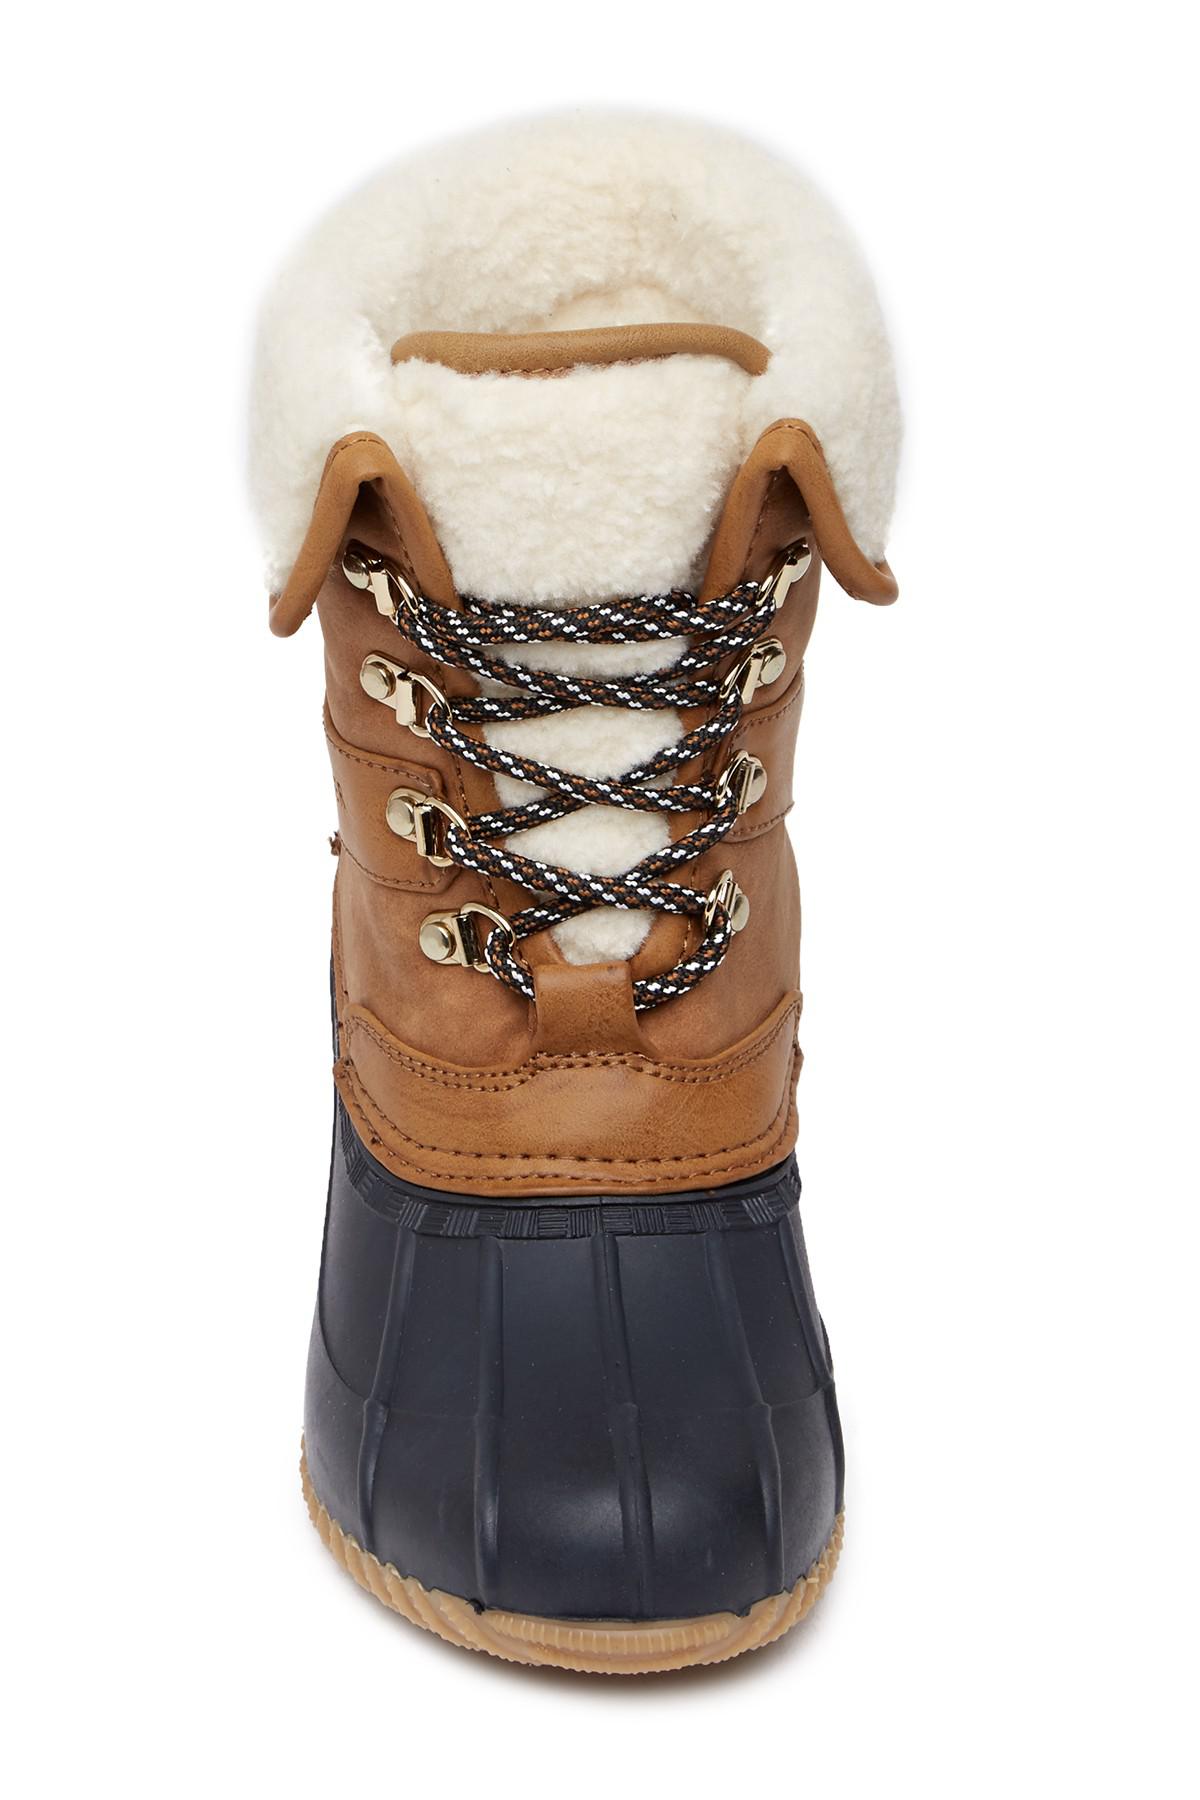 tommy hilfiger rusteen faux shearling lined duck boot